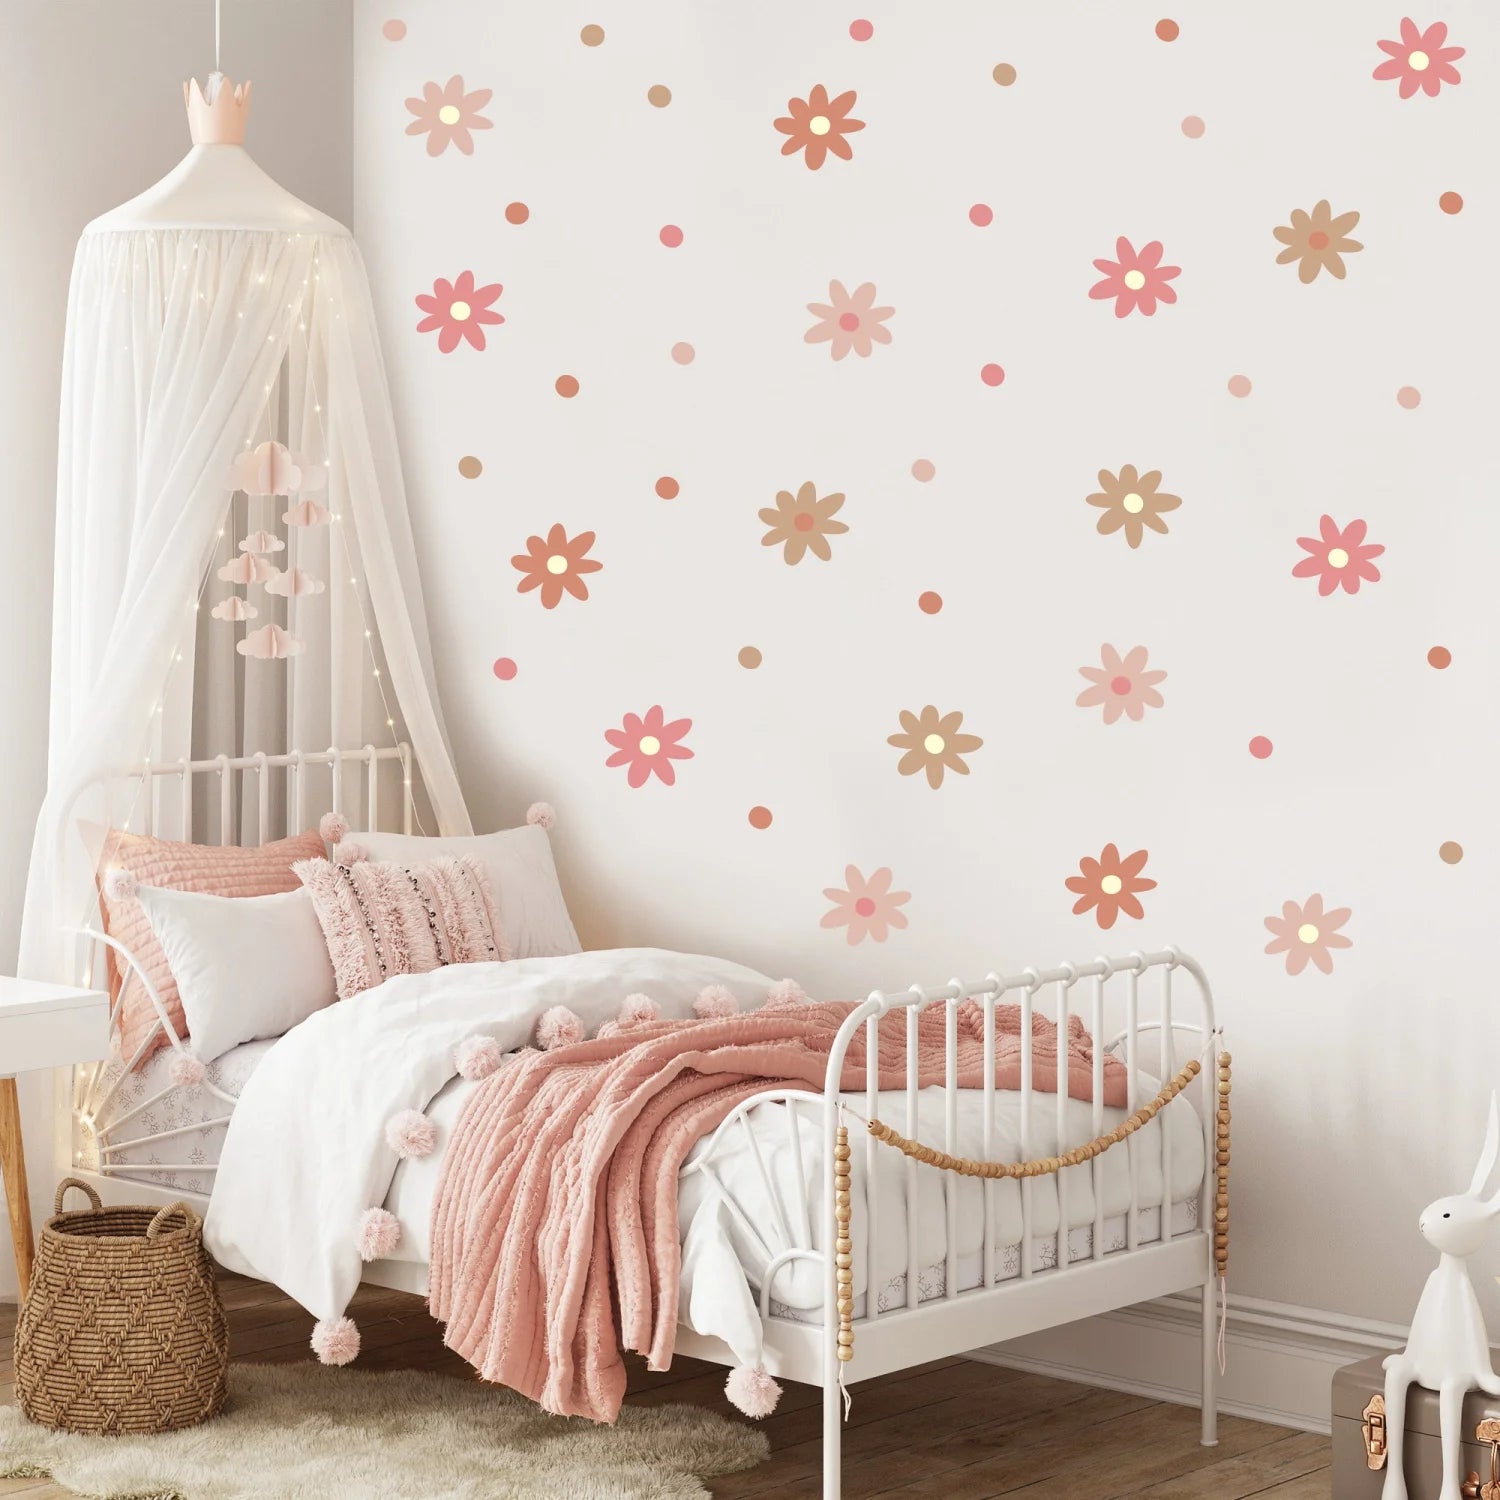 Daisy Florals Wall Decal - Decals Nature